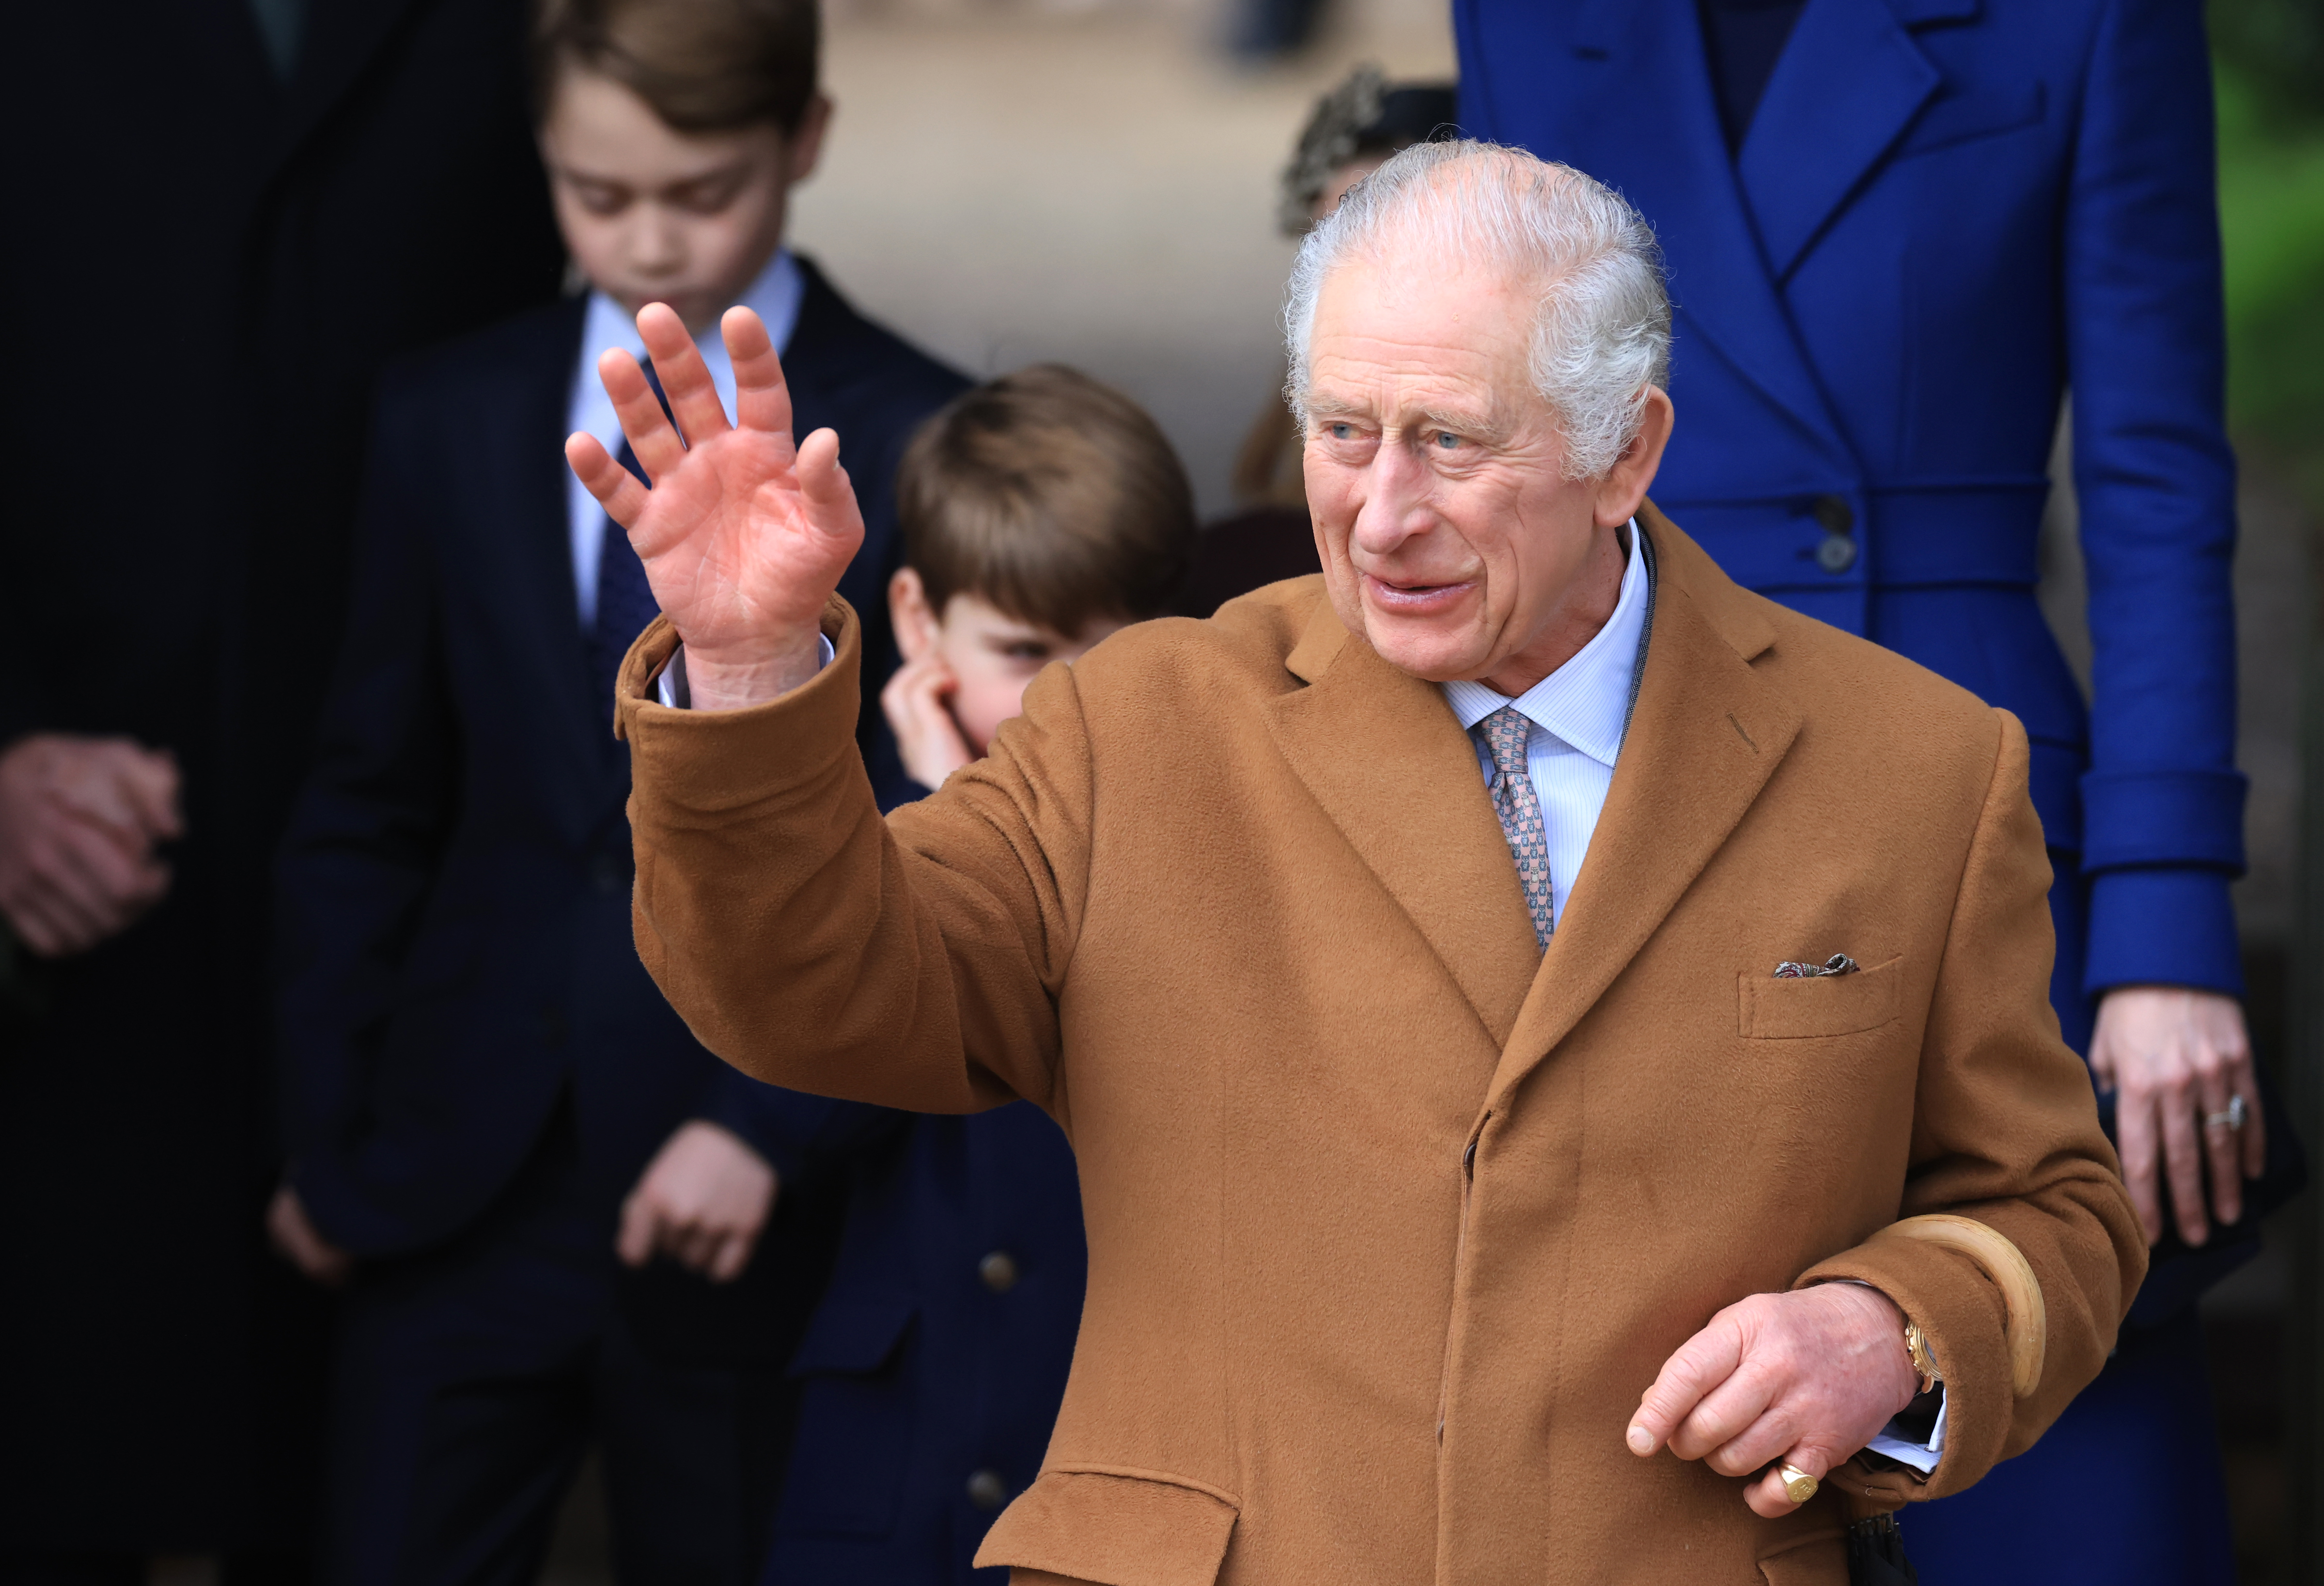 King Charles III leaves after the Christmas Morning Service at Sandringham Church in Sandringham, Norfolk, on December 25, 2023. | Source: Getty Images